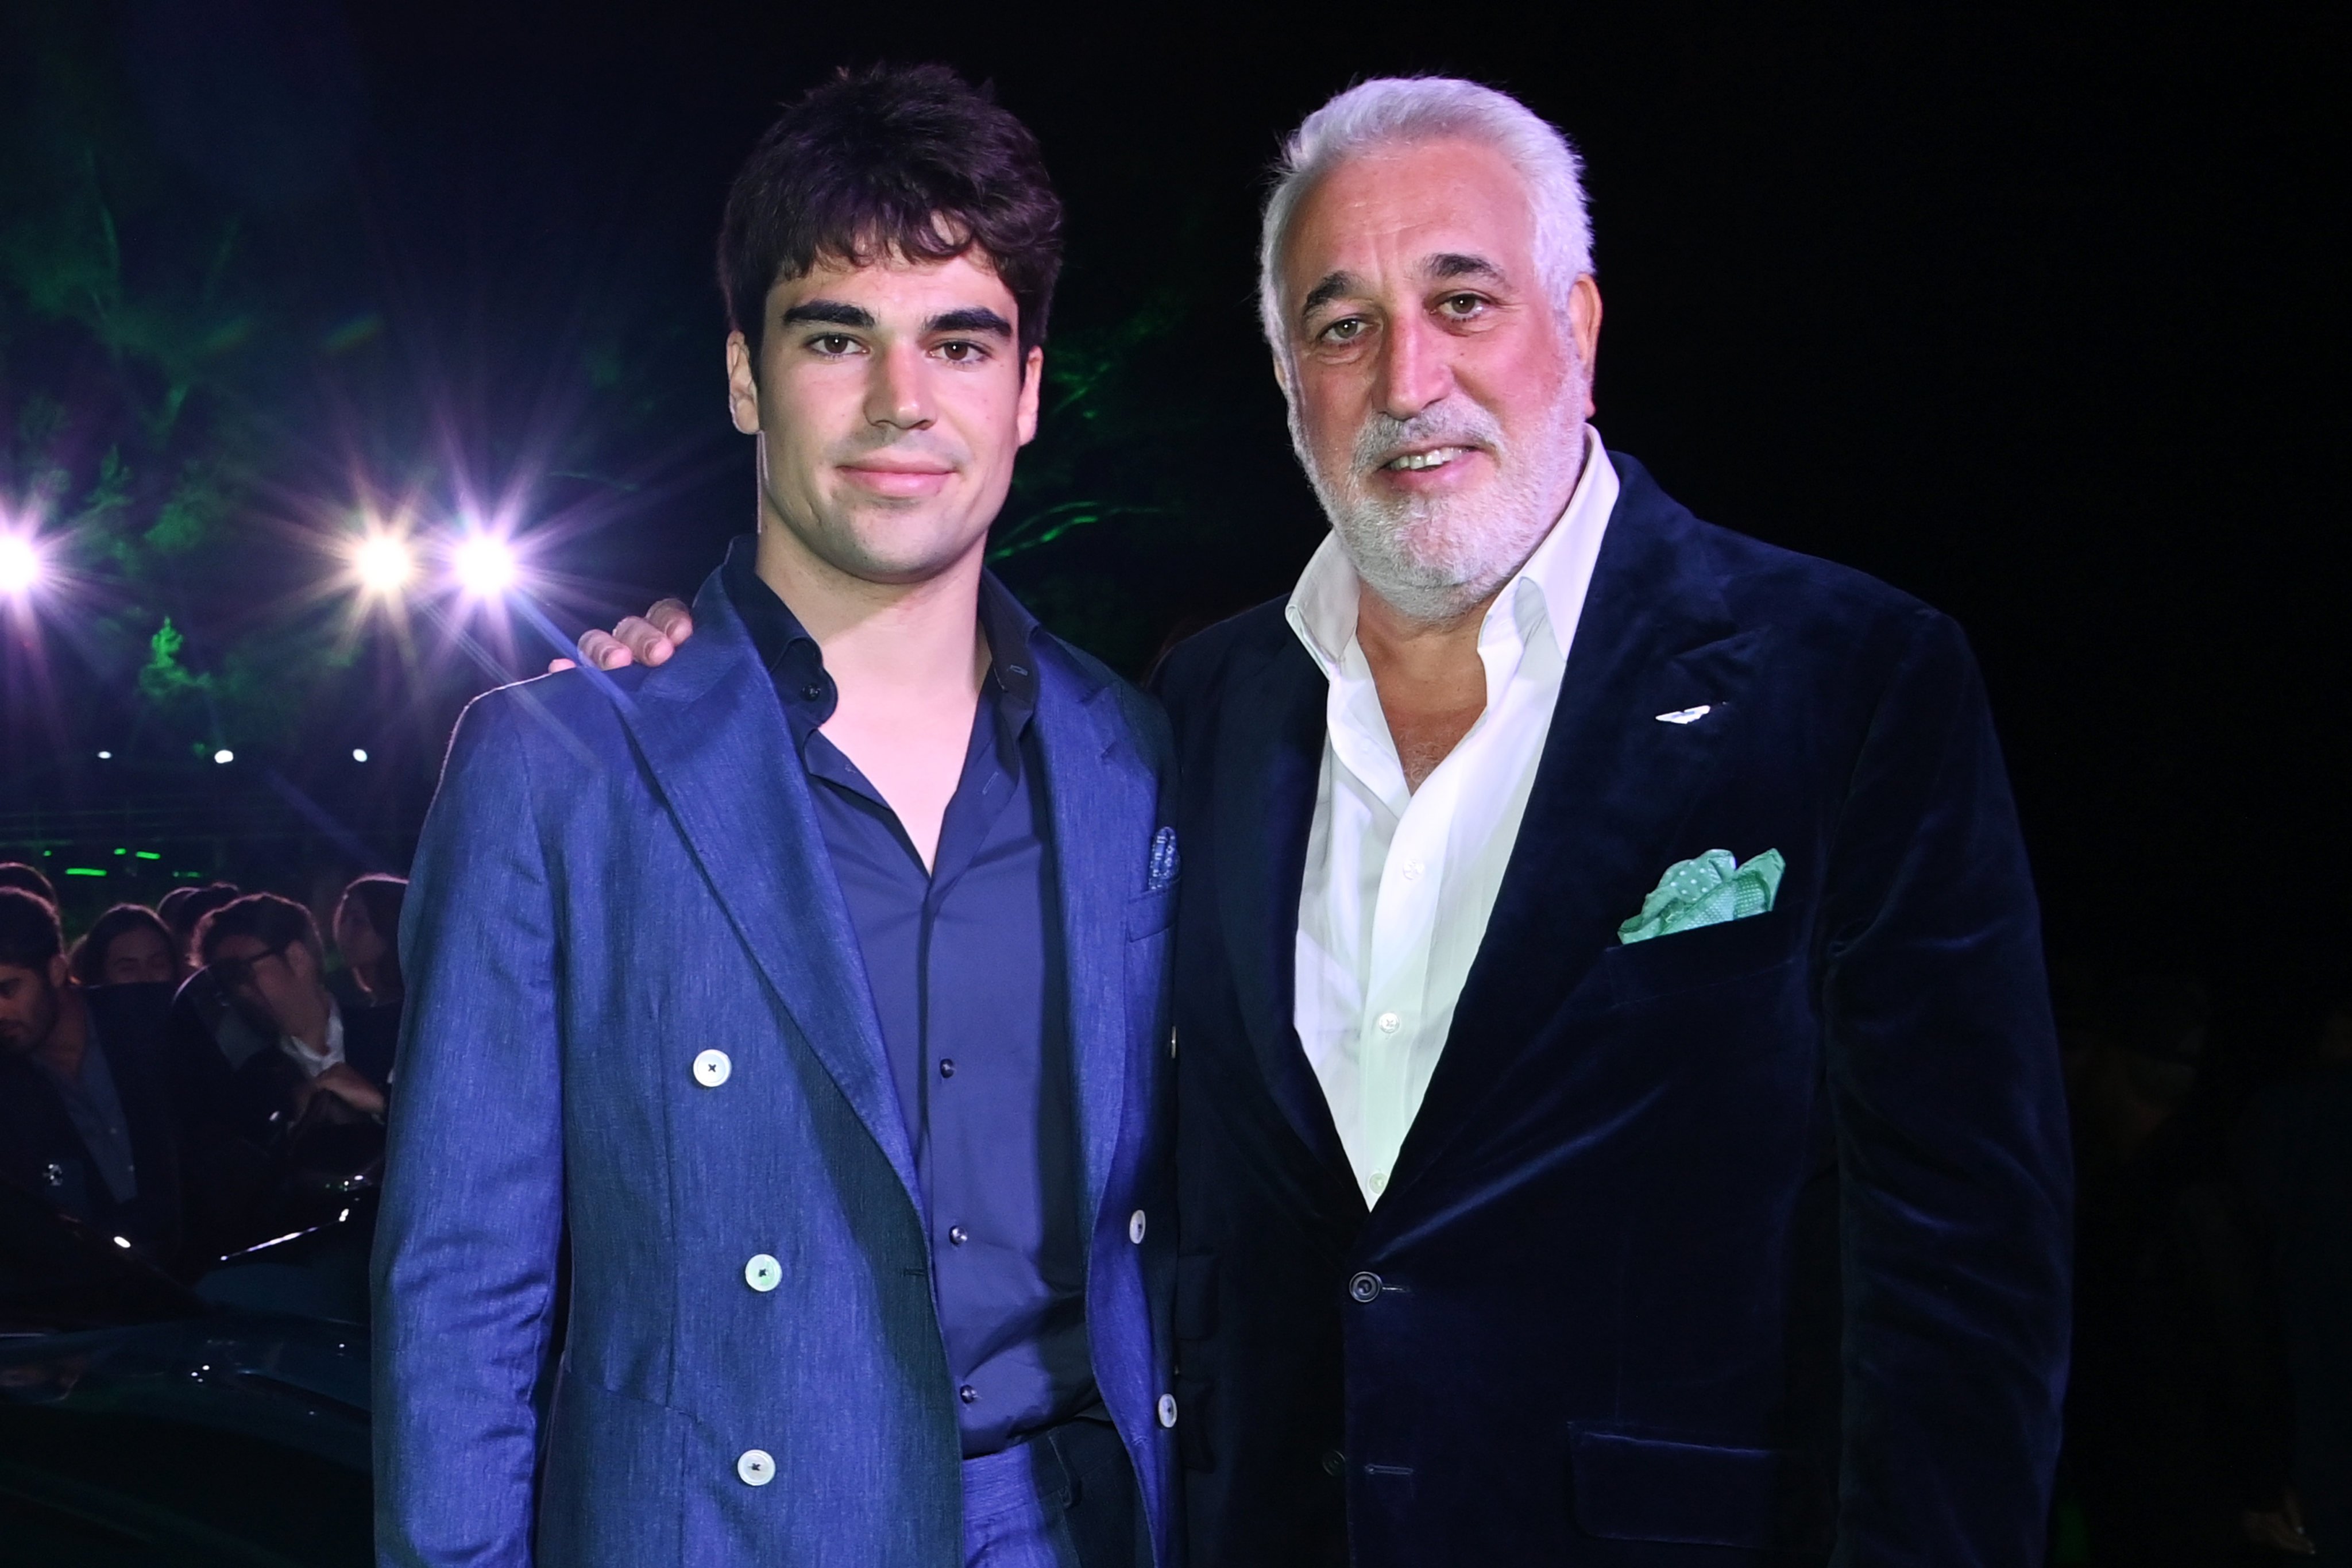 Lance Stroll with his billionaire father, Lawrence Stroll, executive chairman of Aston Martin. Photo: Getty Images for Aston Martin